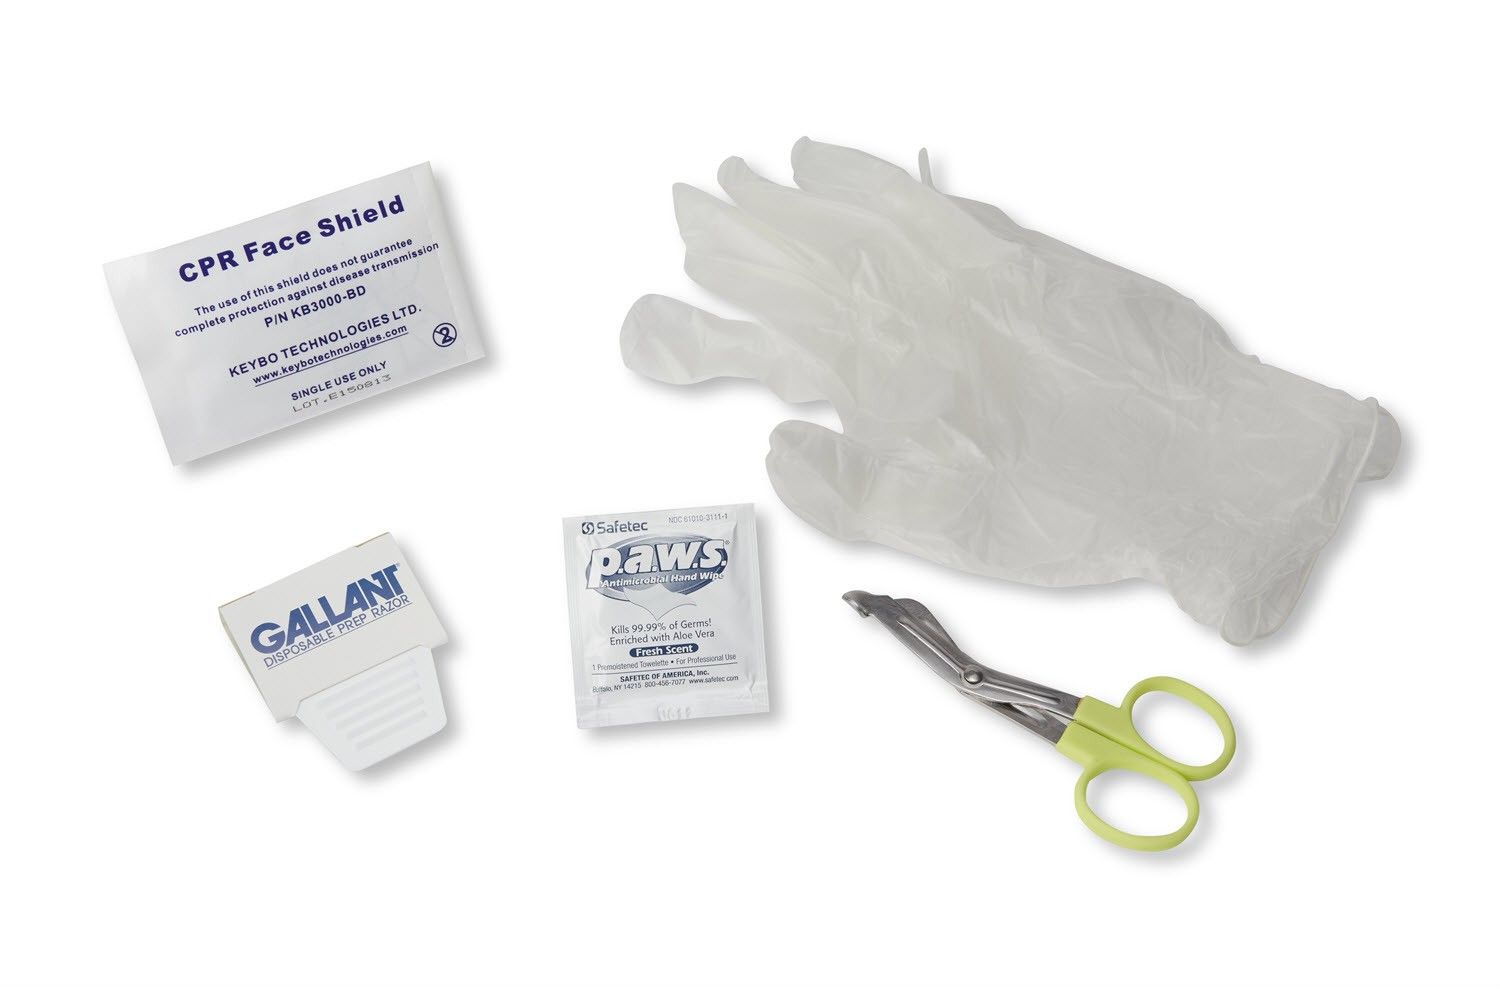 Zoll CPR-D Accessory Kit, 8900-0807-01 - CME Corp